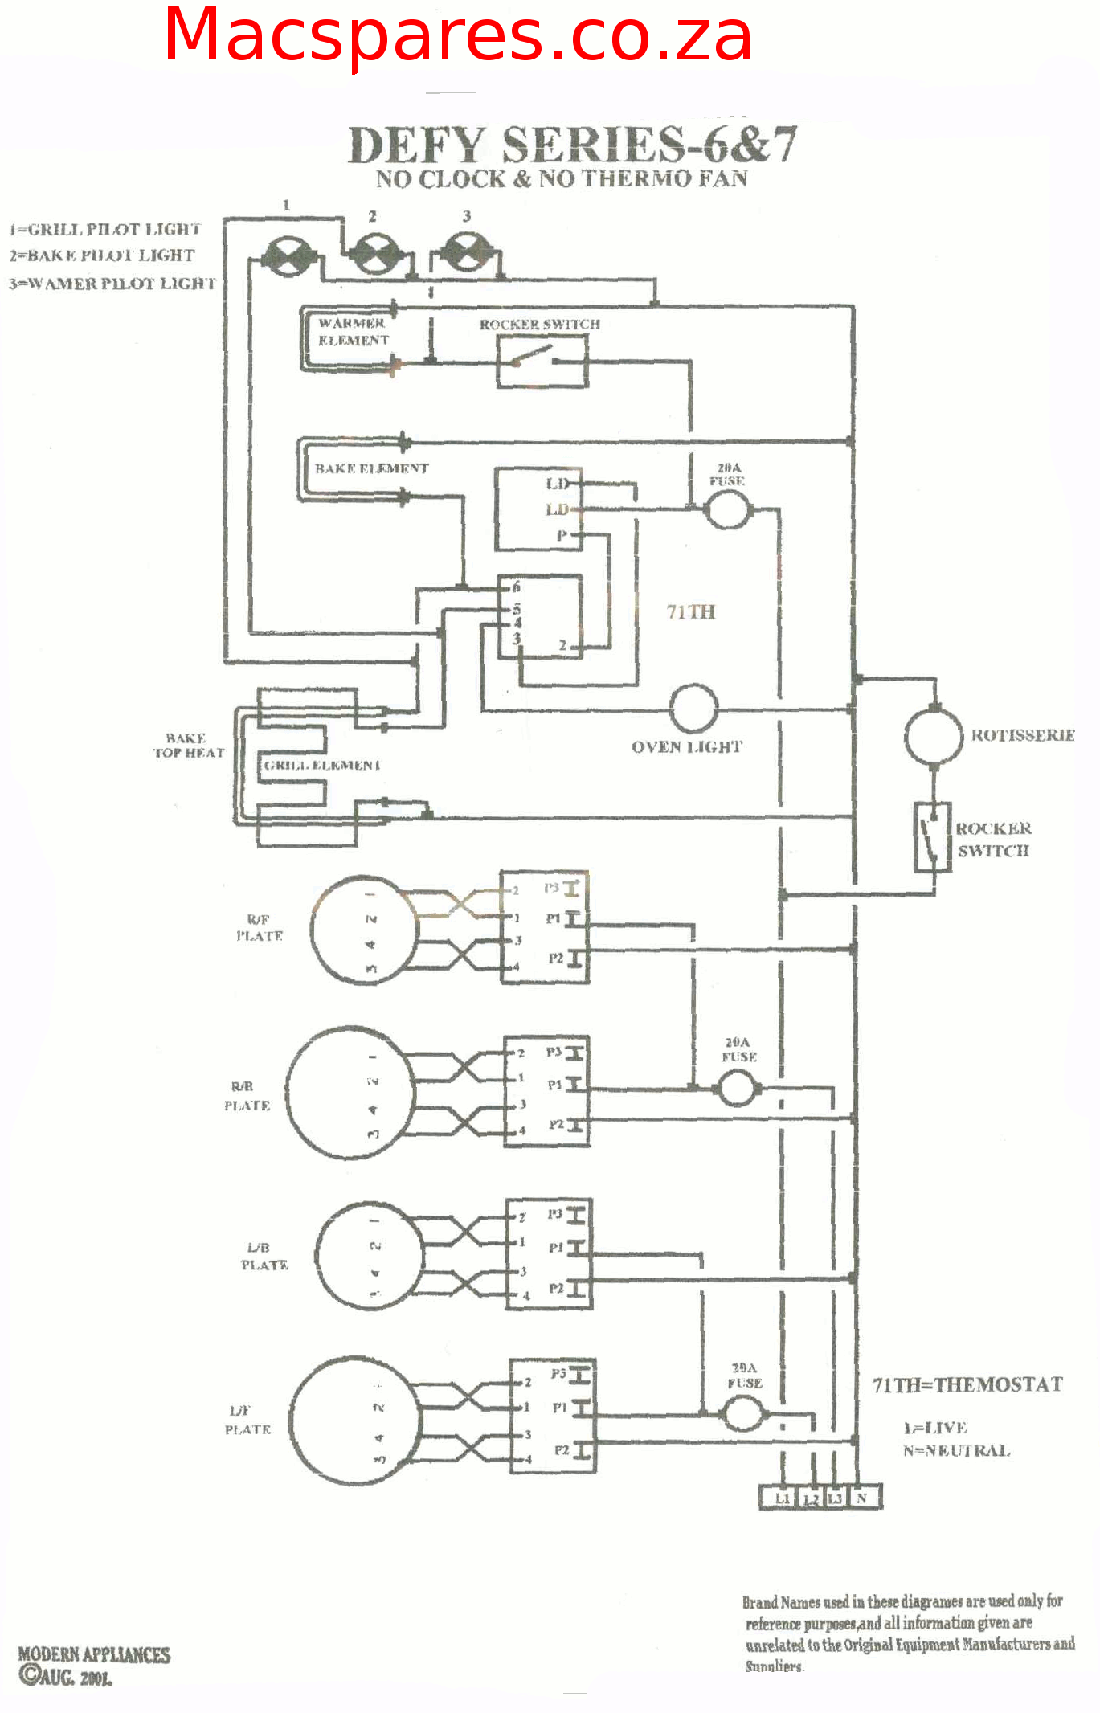 Electric Oven Wiring Diagram from macspares.co.za